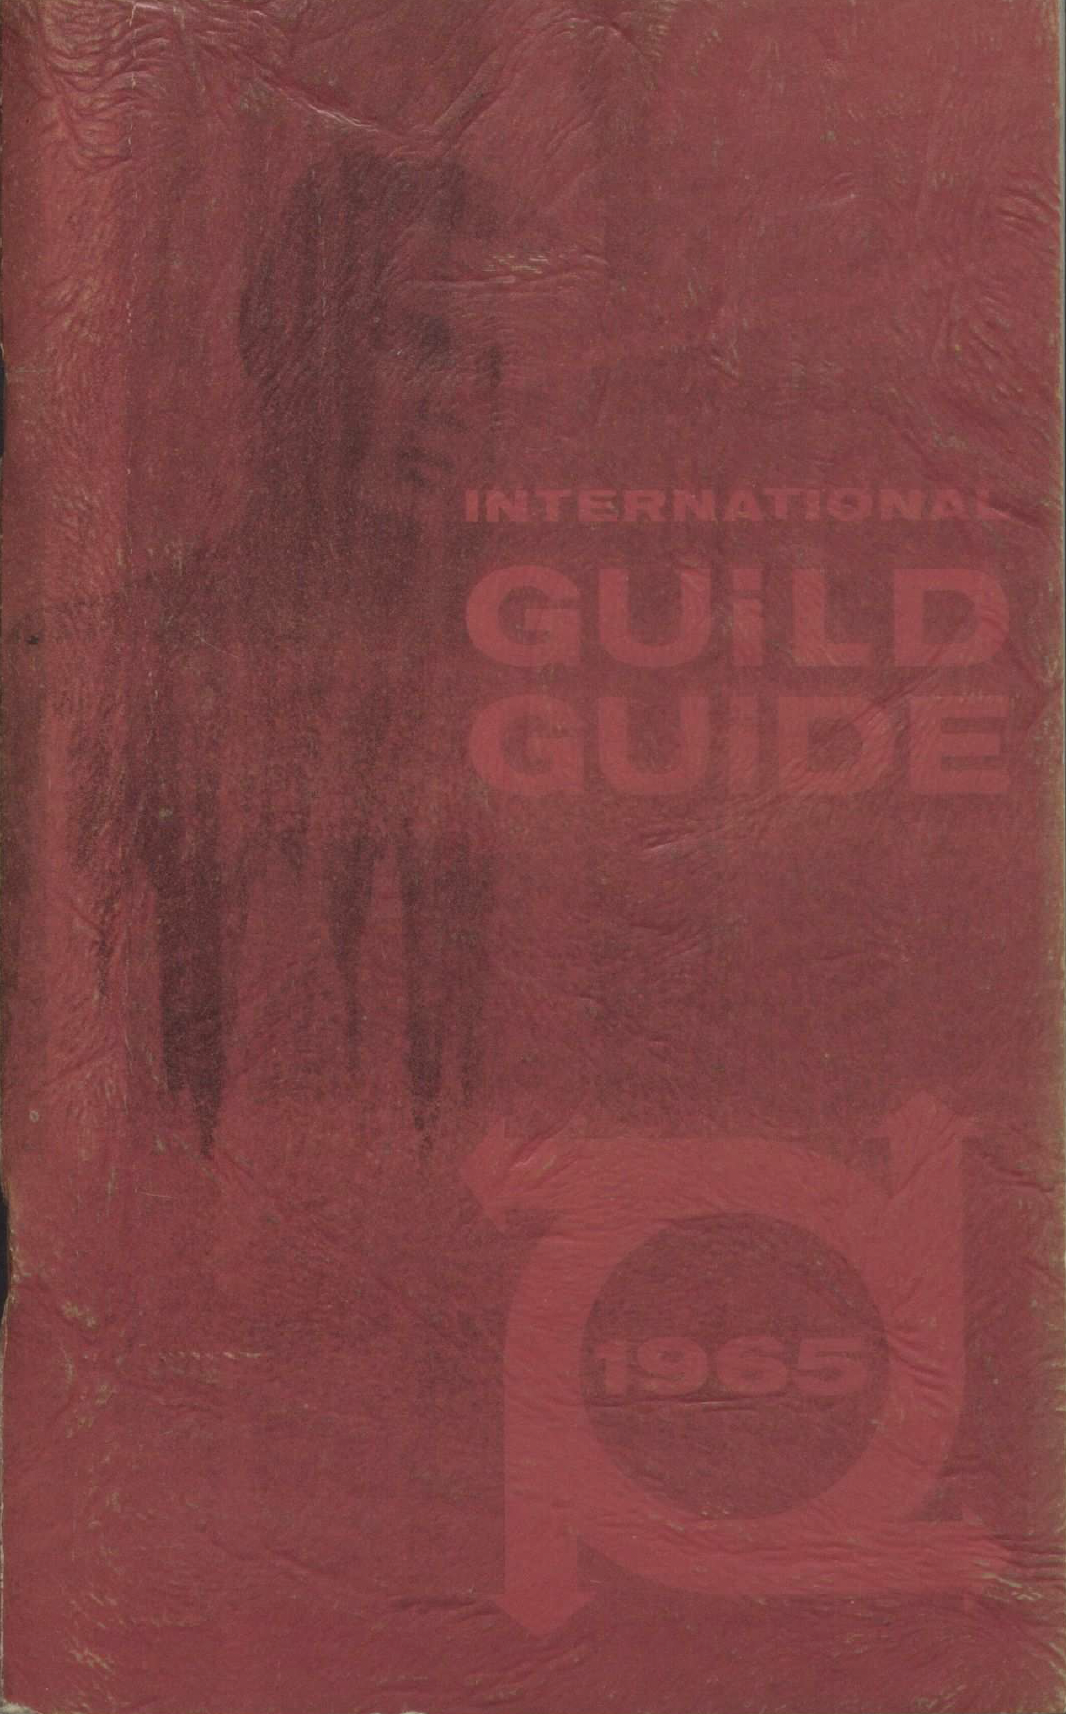 A man’s torso was faintly visible on the cover of the International Guild Guide.